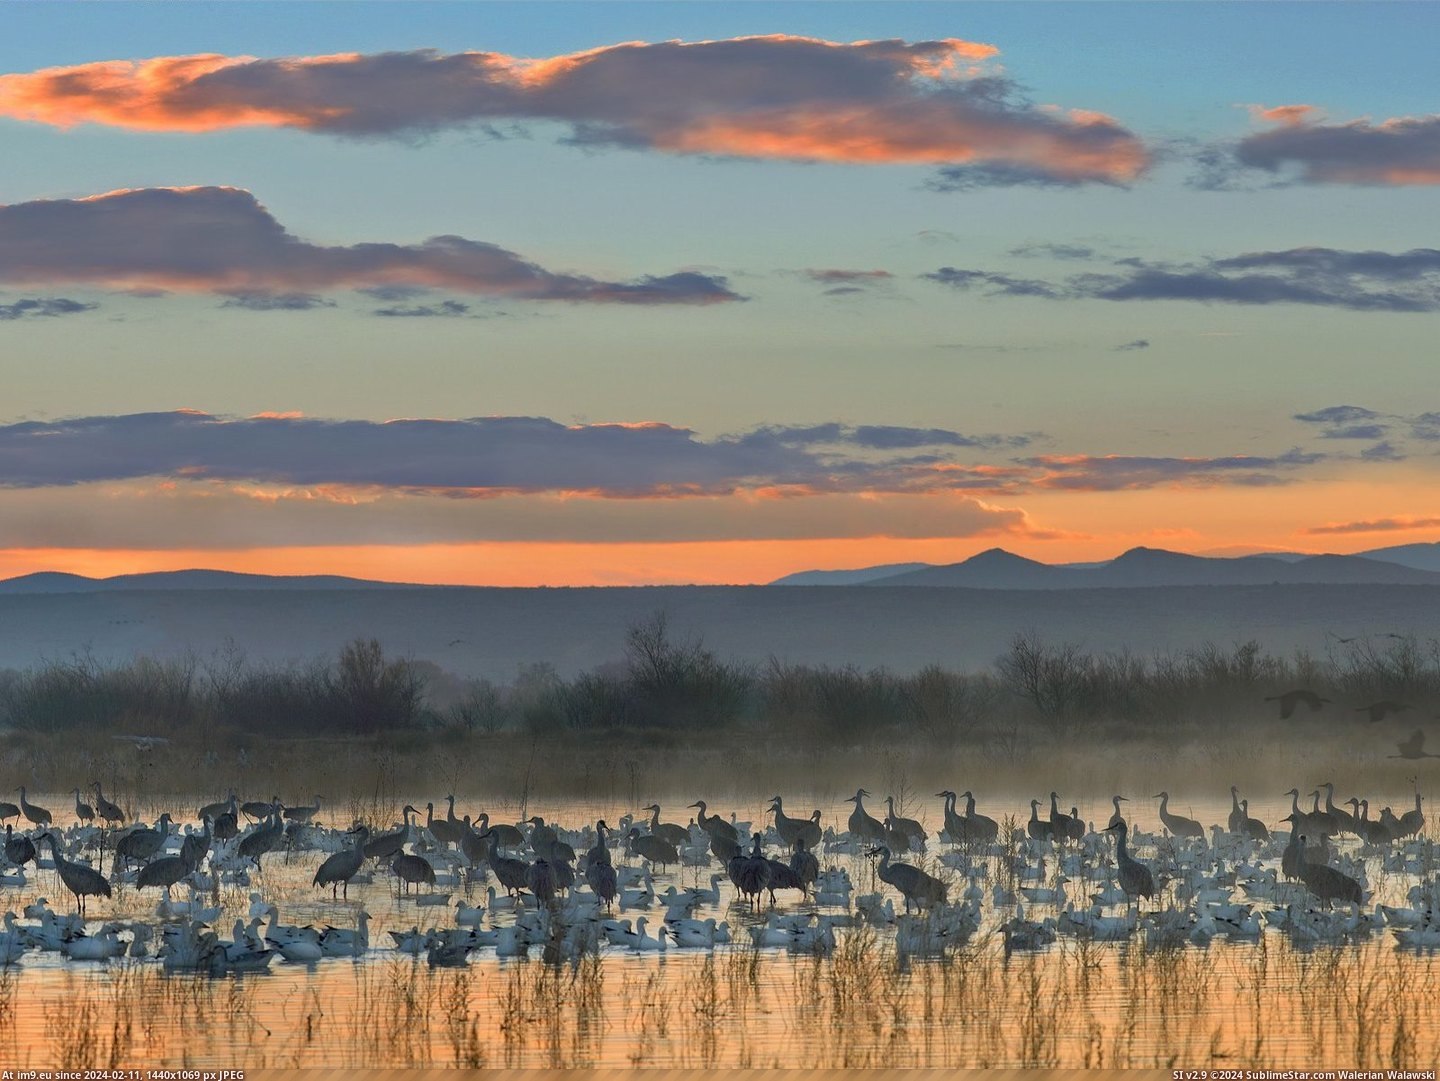 Sandhill Cranes and Snow Geese, Bosque del Apache National Wildlife Refuge, New Mexico (in Beautiful photos and wallpapers)